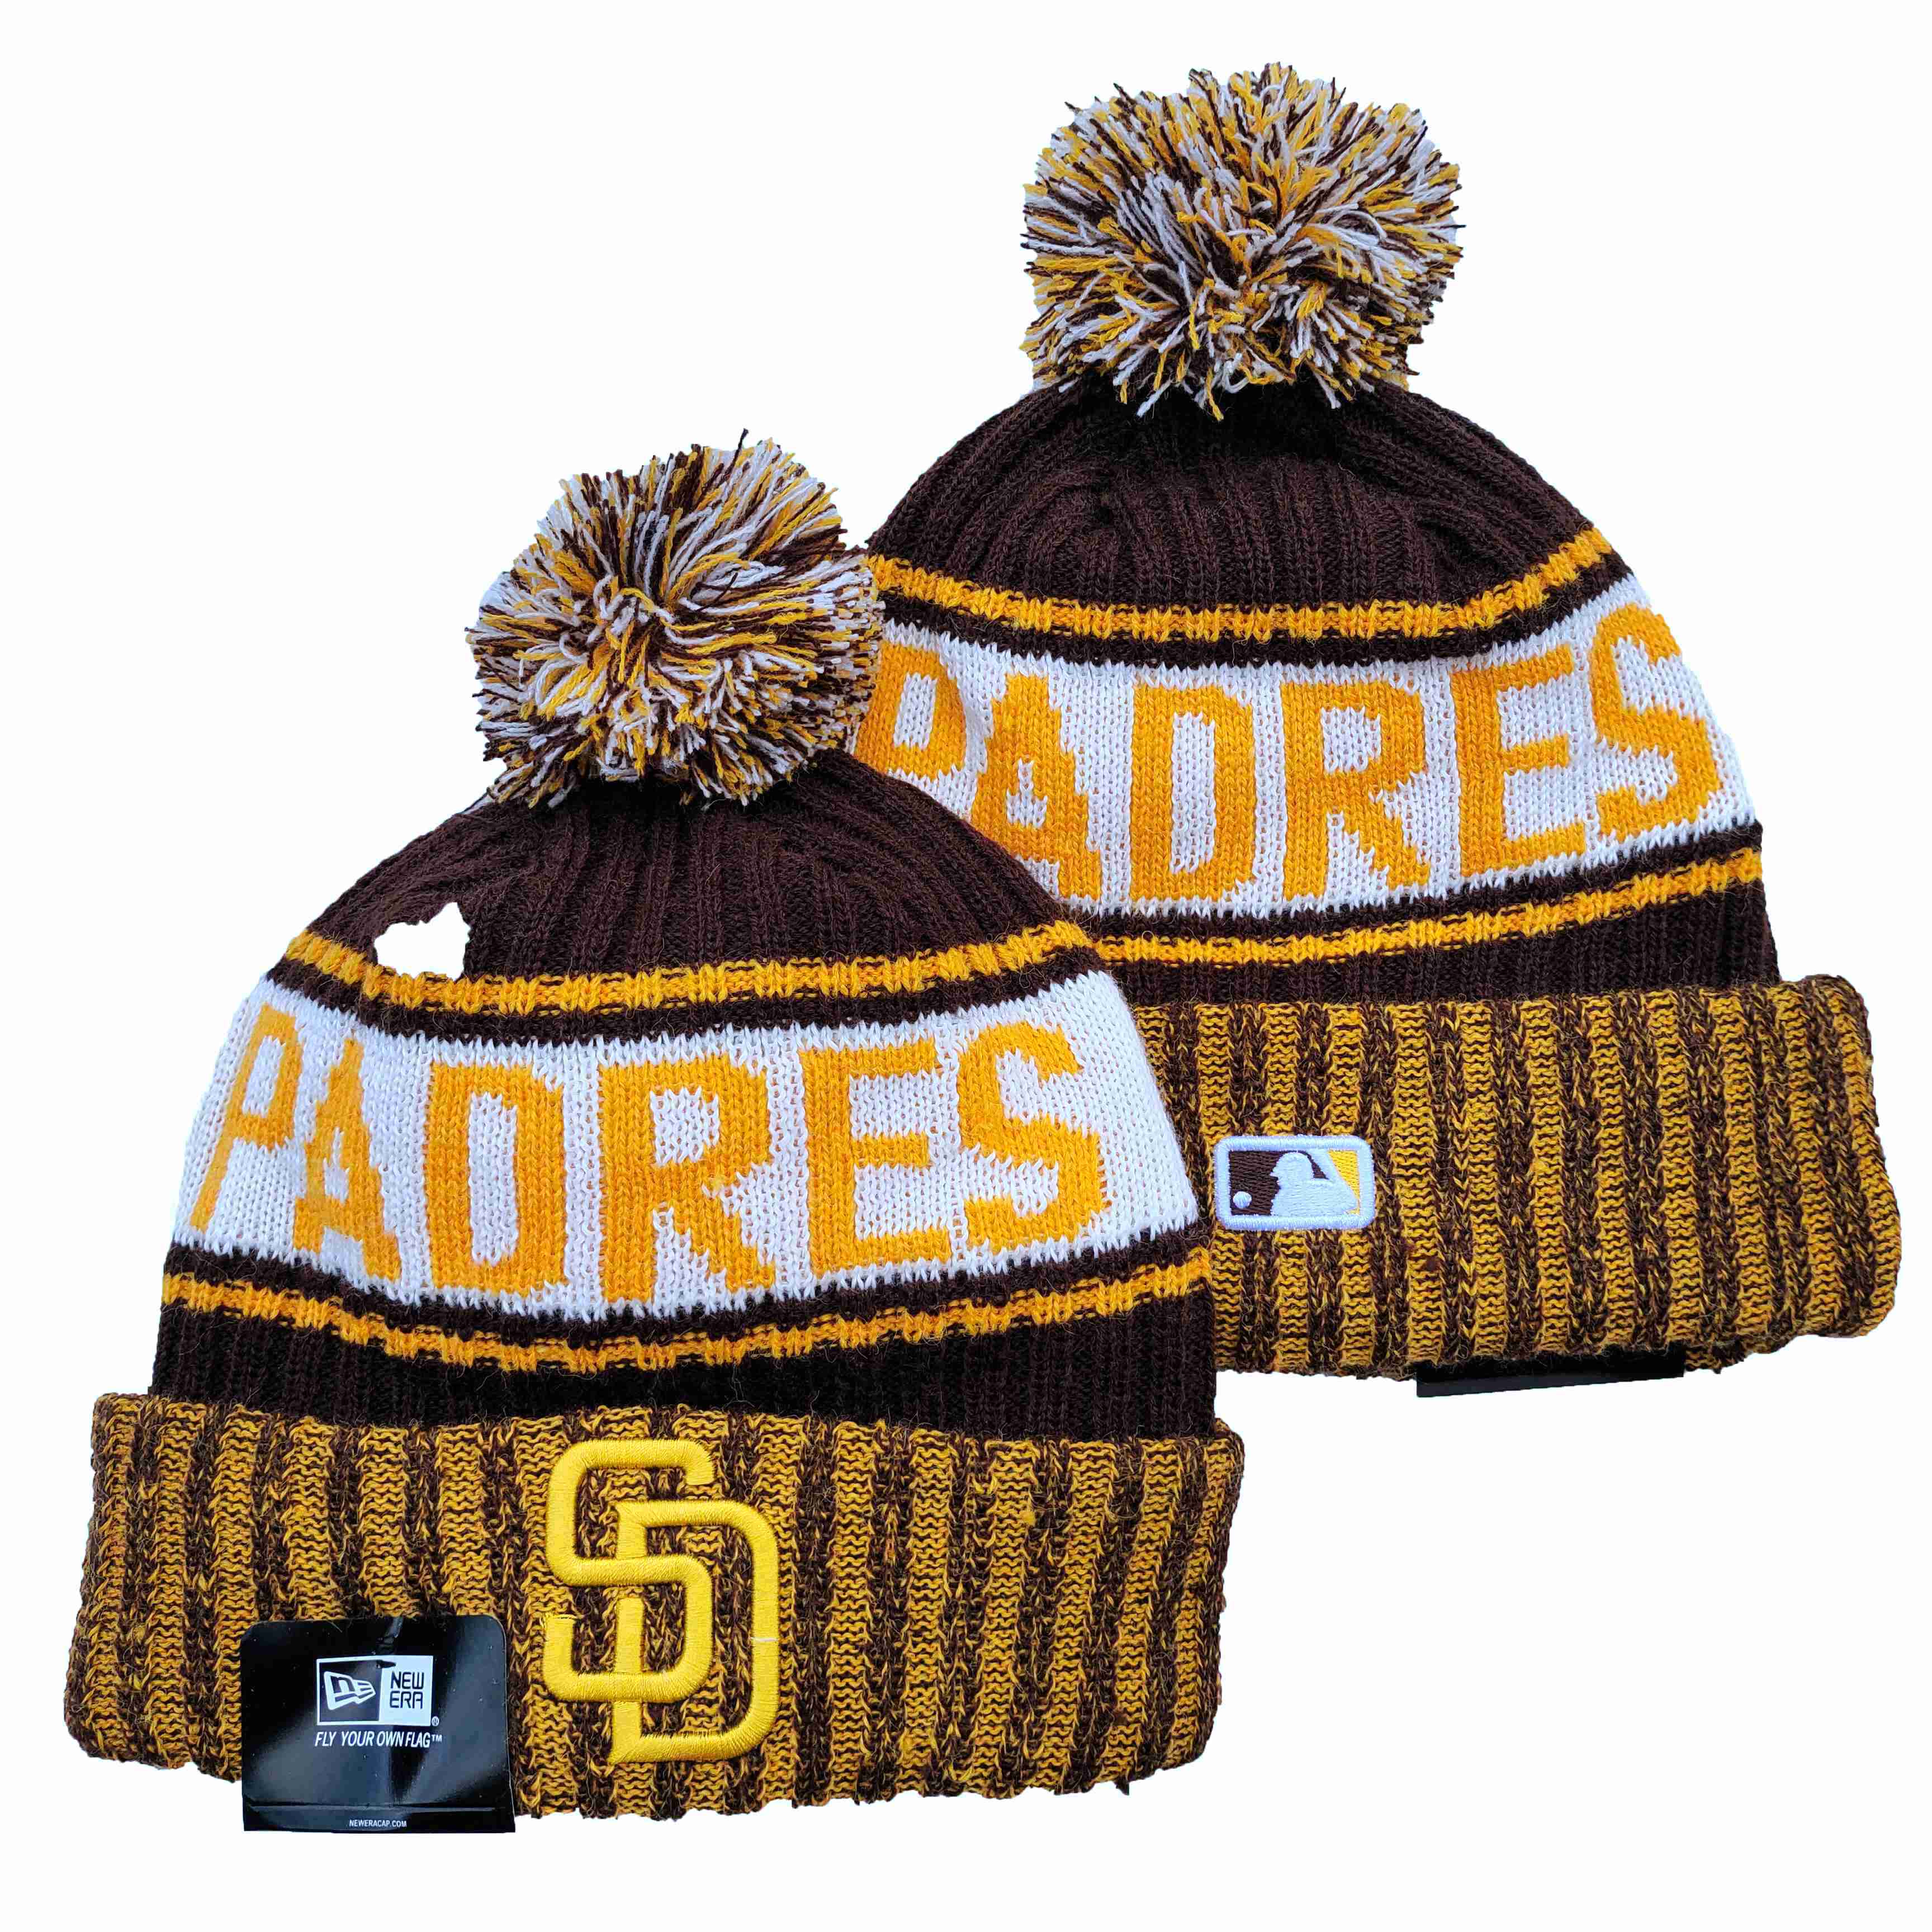 San Diego Padres Knit Hats -3